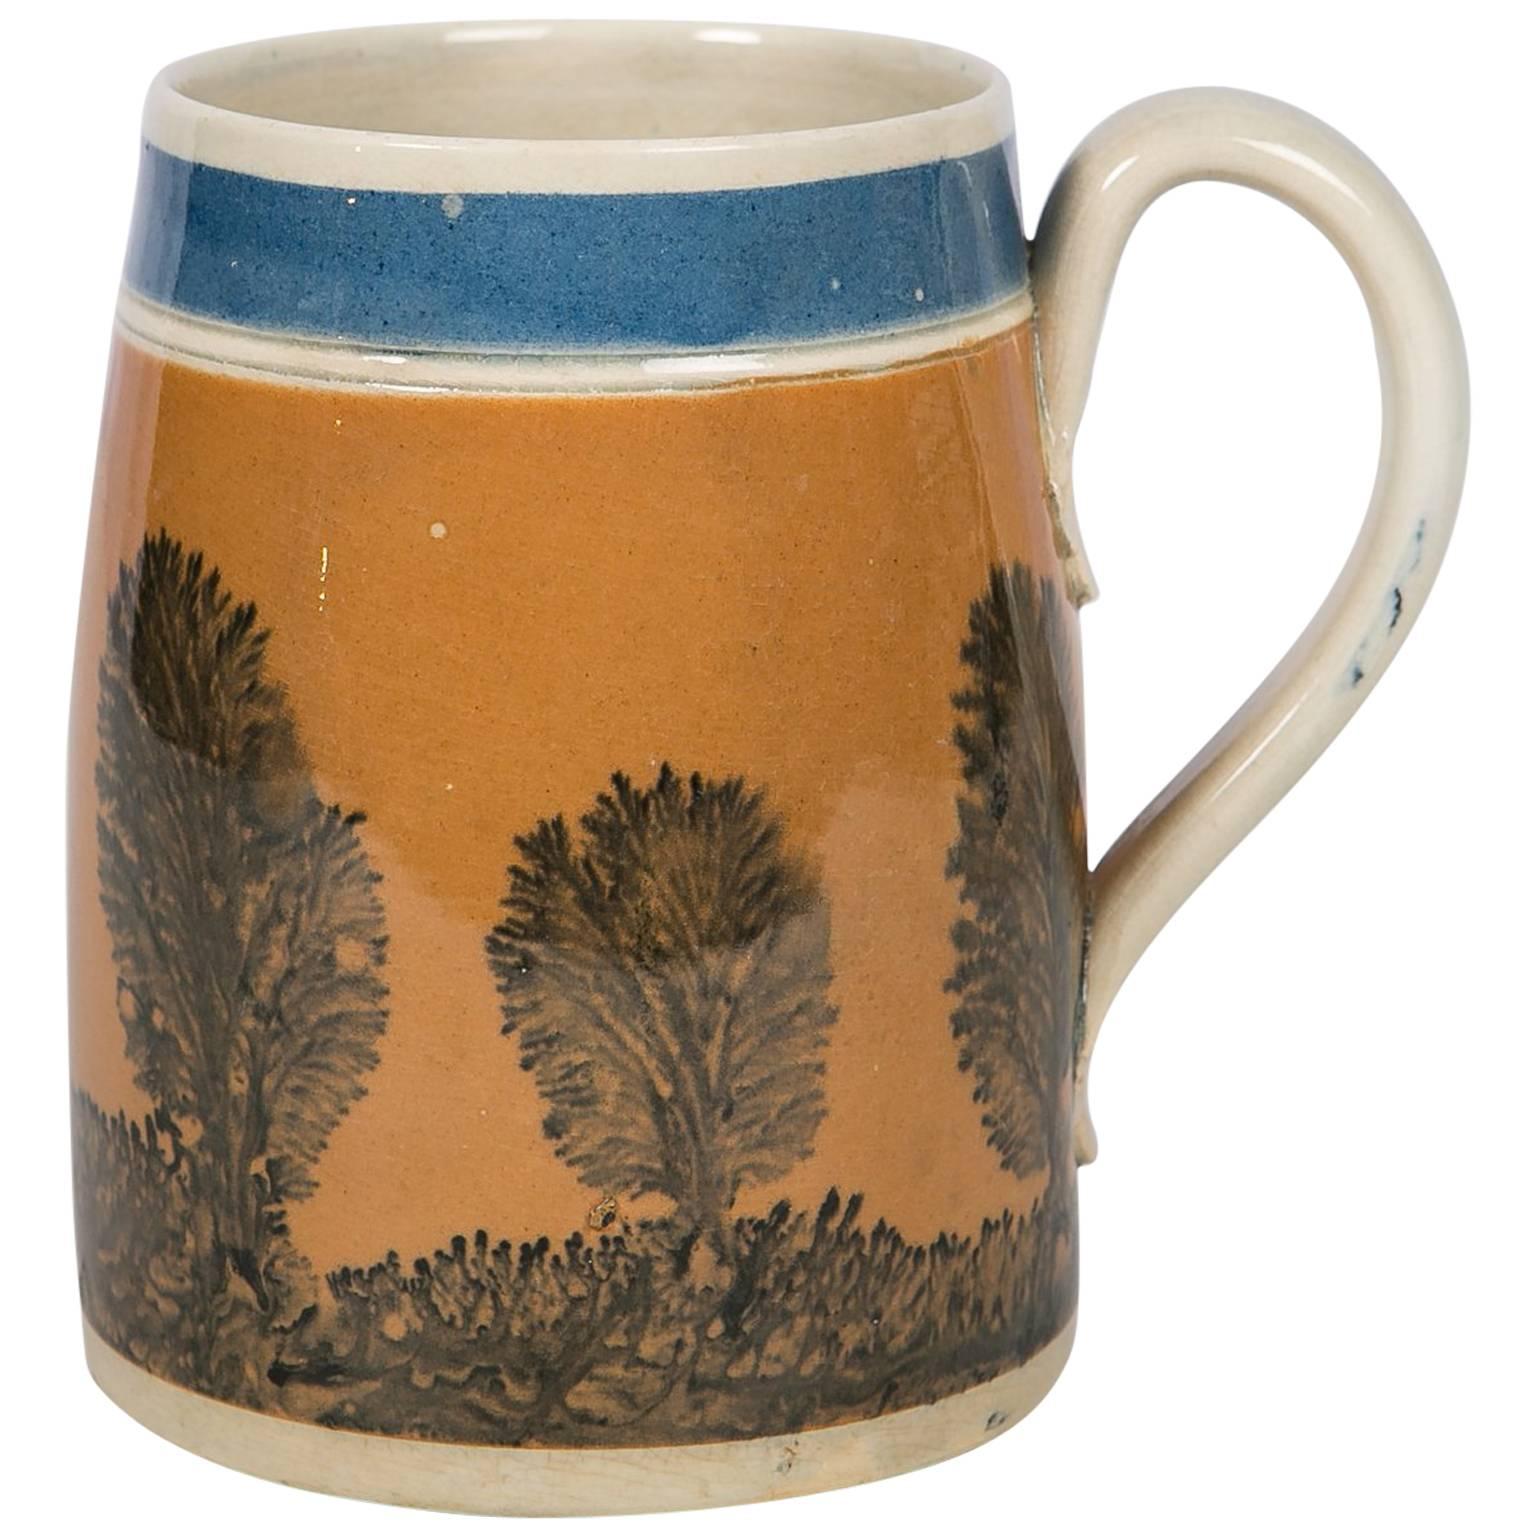 Antique Mochaware Mug Decorated with "Trees"